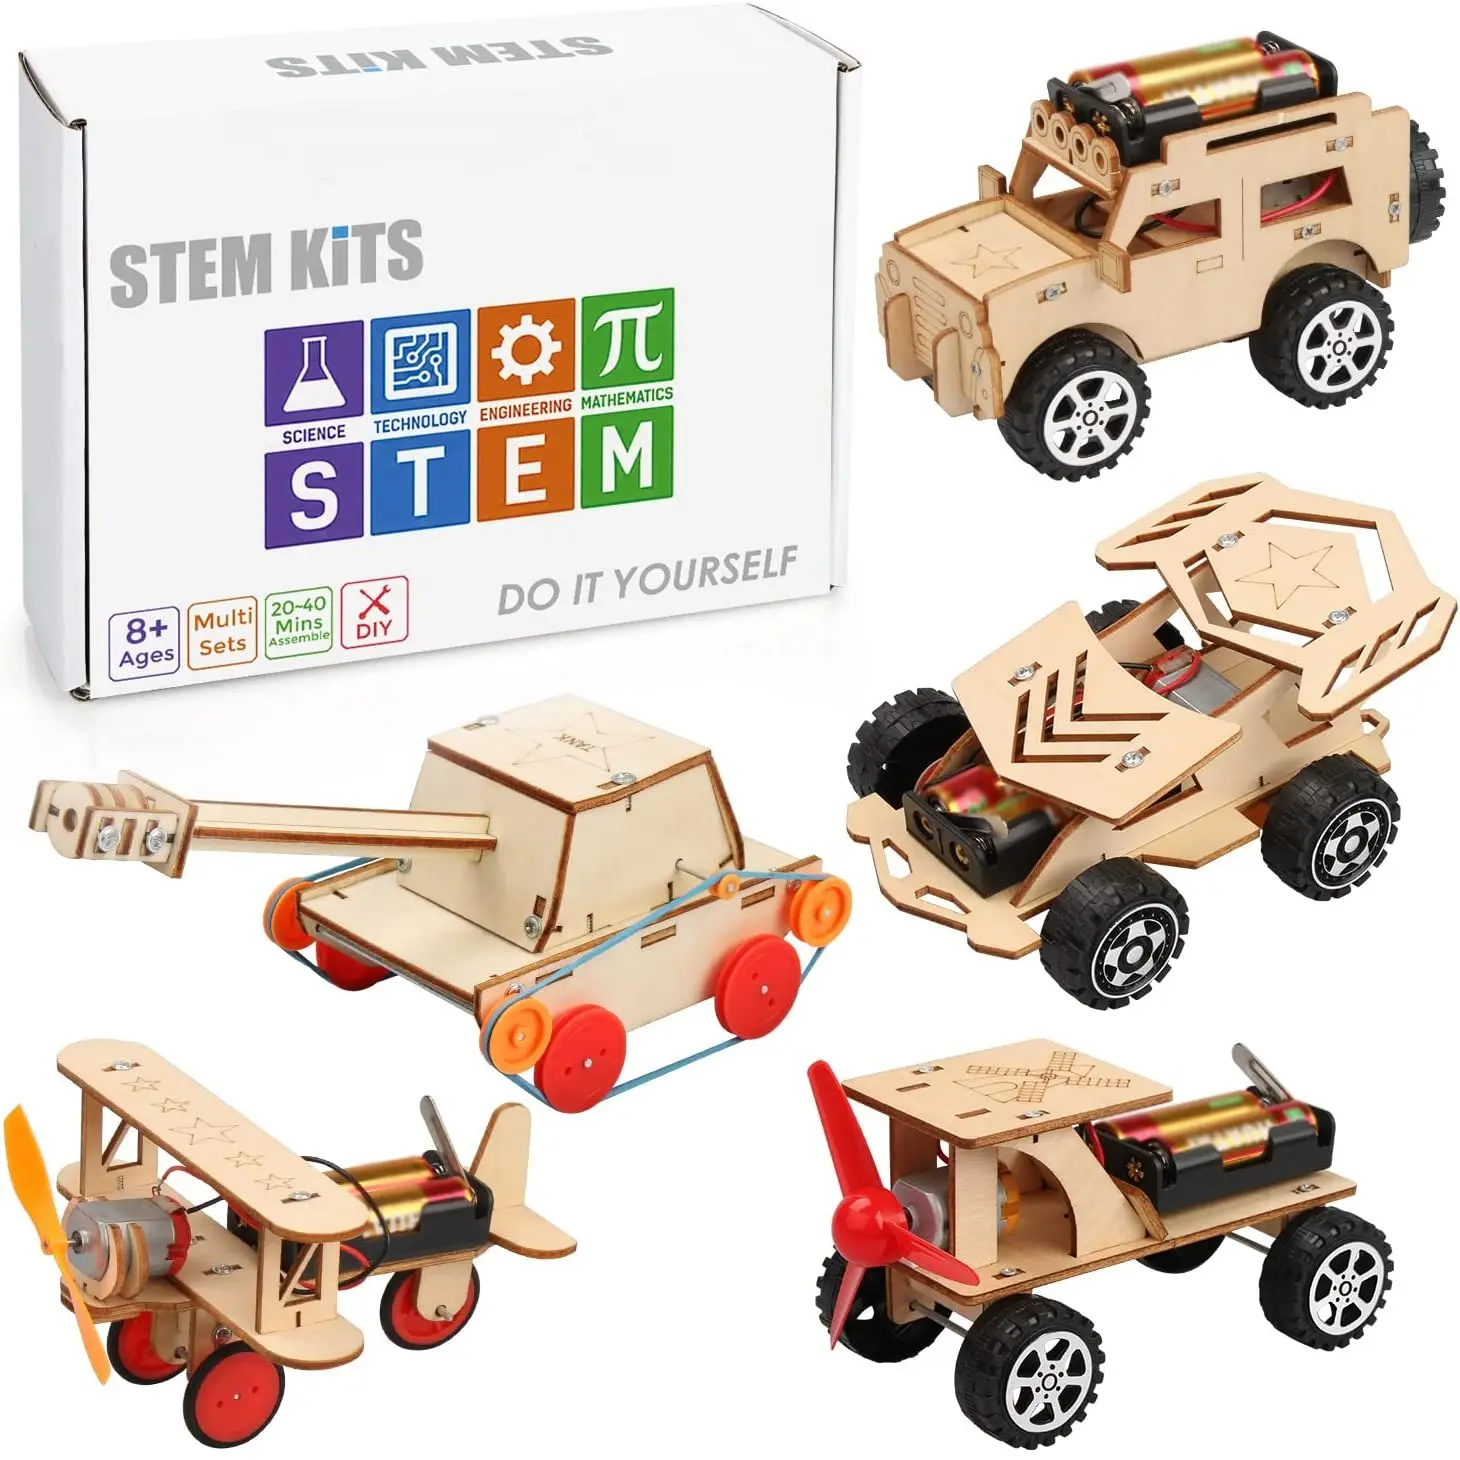 Kids 5 in 1 DIY Handmade STEM Toys Wooden Model Car Kit 3D Puzzle Science Experiments Educational Building Gift for Children